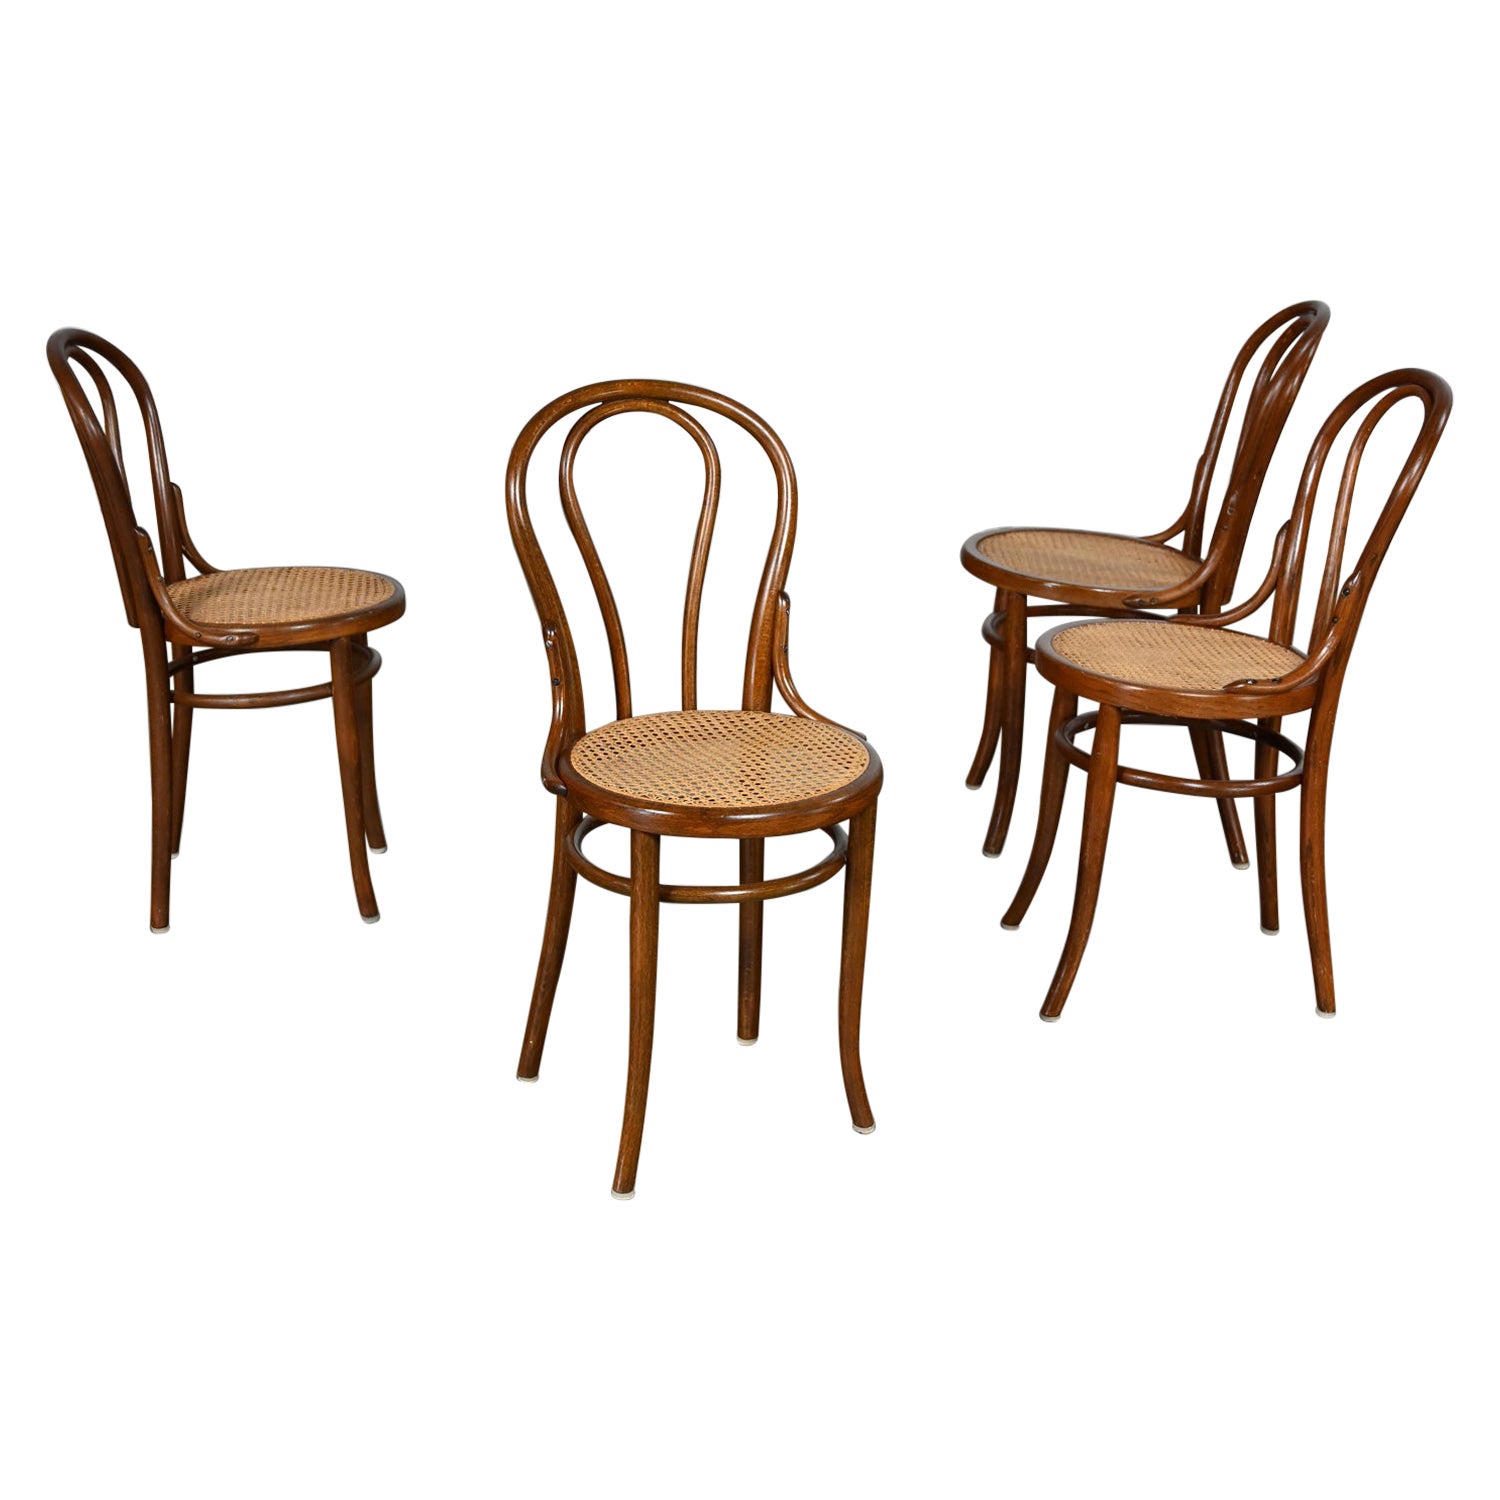 Set 4 Bauhaus Style #18 Café Chairs by Thonet Bentwood Frames & Hand Caned Seats